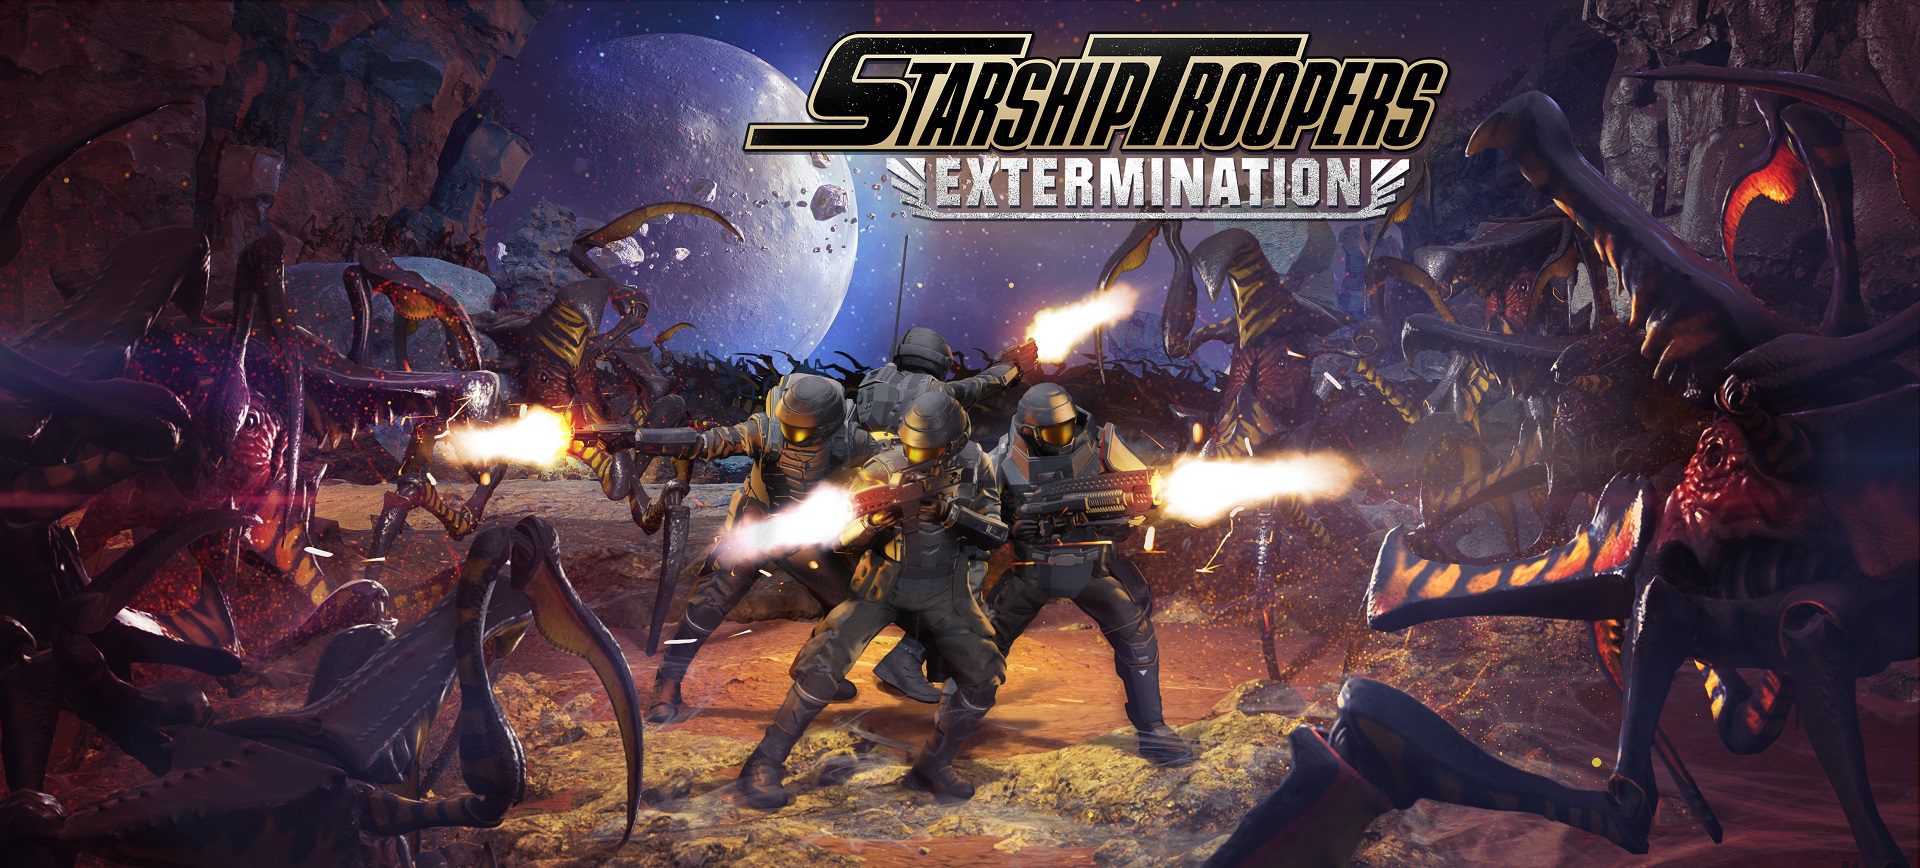 An All-New Glimpse Into Starship Troopers: Extermination – Thinking of ...